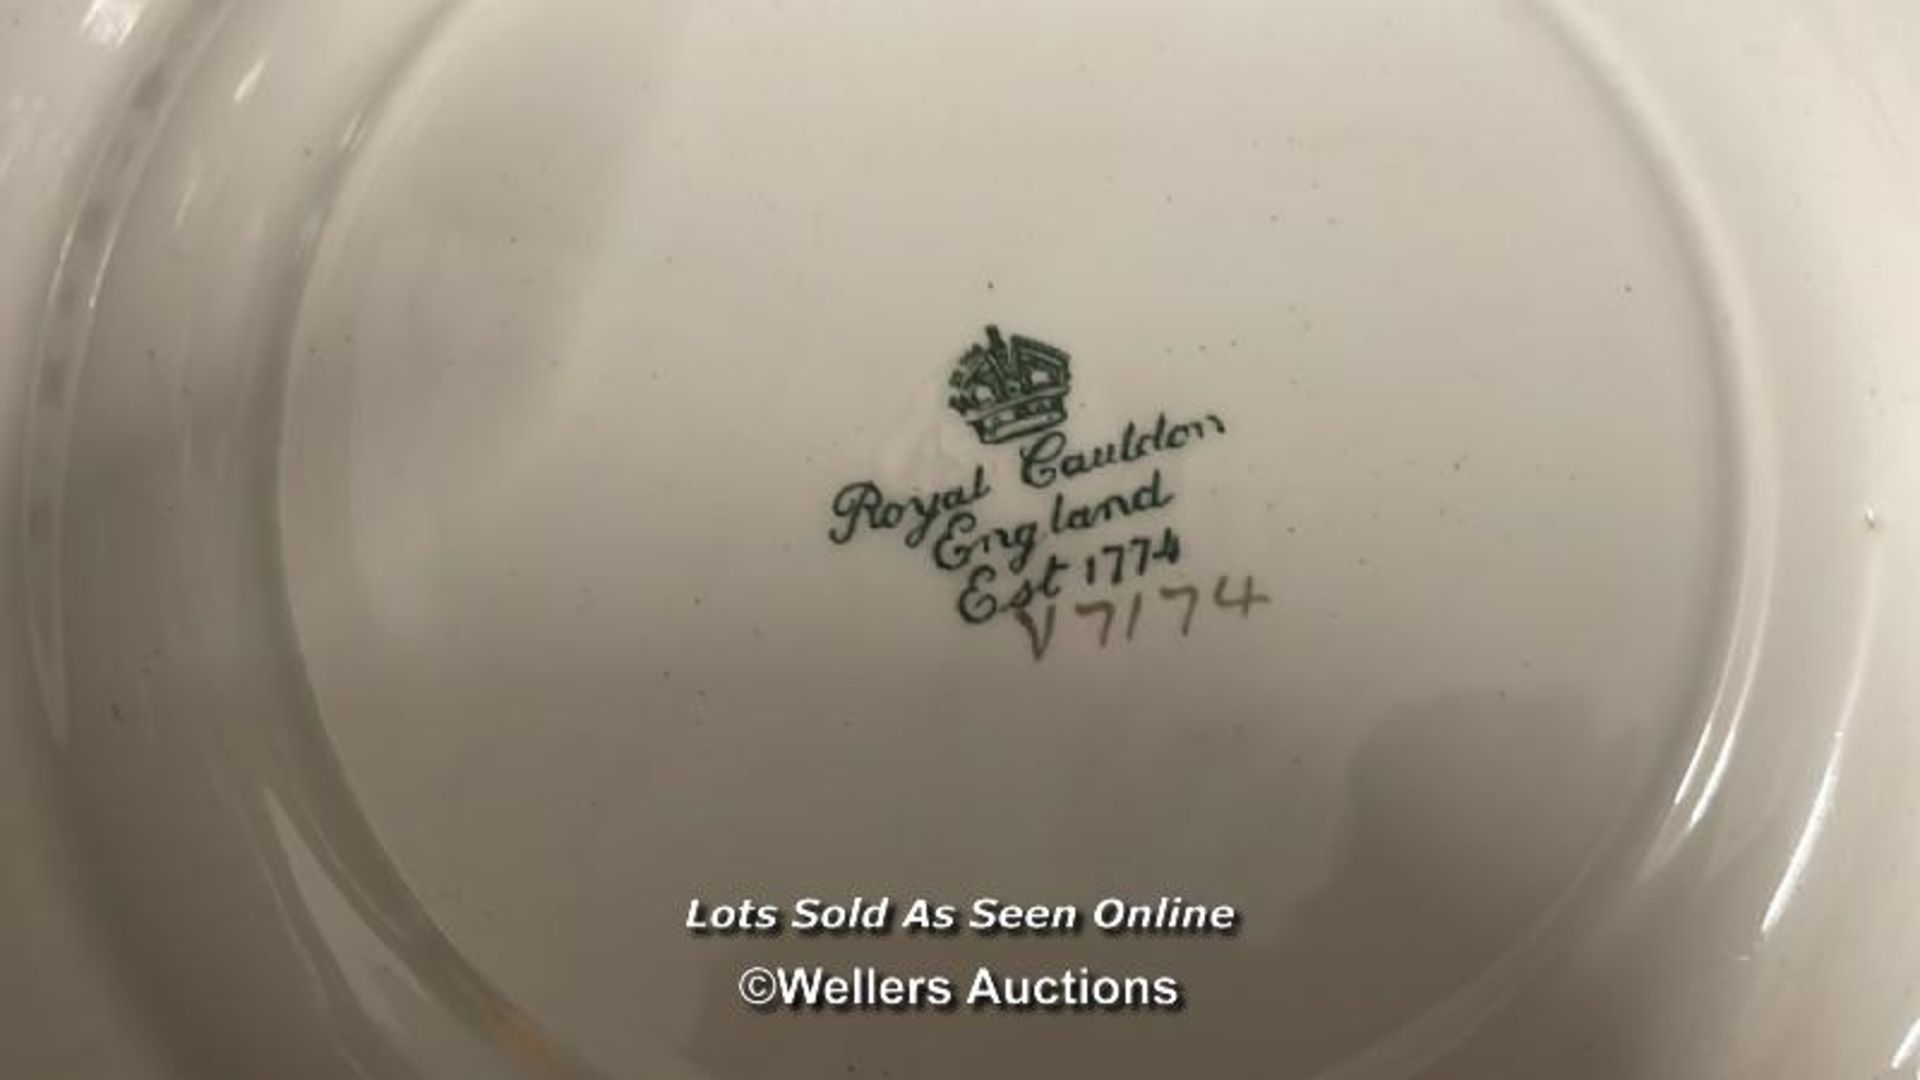 ASSORTED CHINA PLATES AND SAUCERS INCLUDING ROYAL DOULTON "VICTORIA" , ROYAL DOULTON "OLD COLONY" - Image 3 of 13